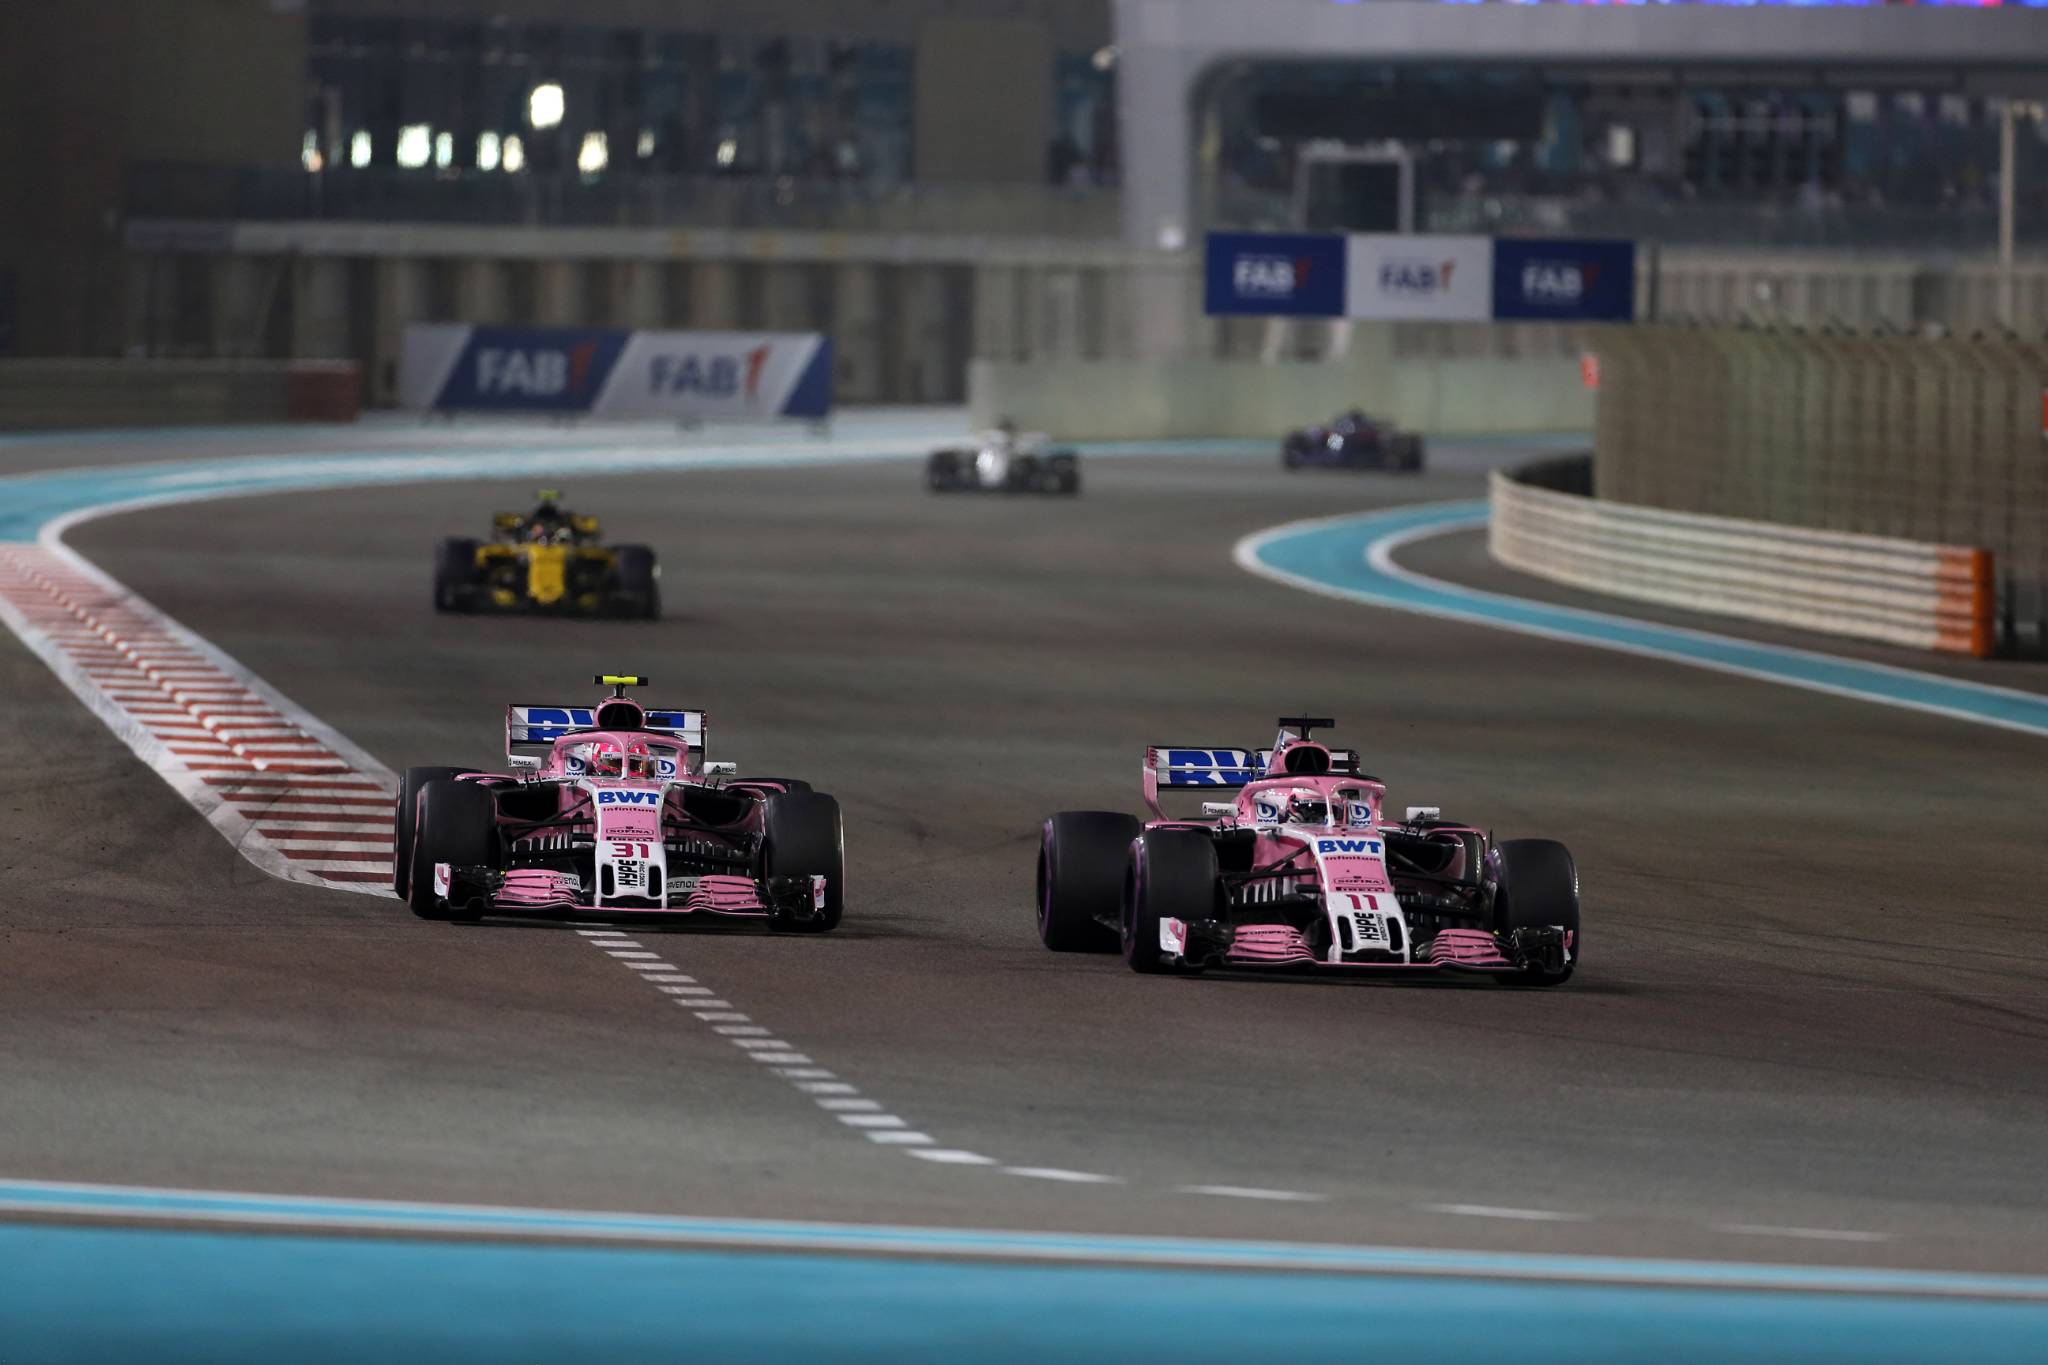 25.11.2018 - Race, Esteban Ocon (FRA) Racing Point Force India F1 VJM11 and Sergio Perez (MEX) Racing Point Force India F1 VJM11 